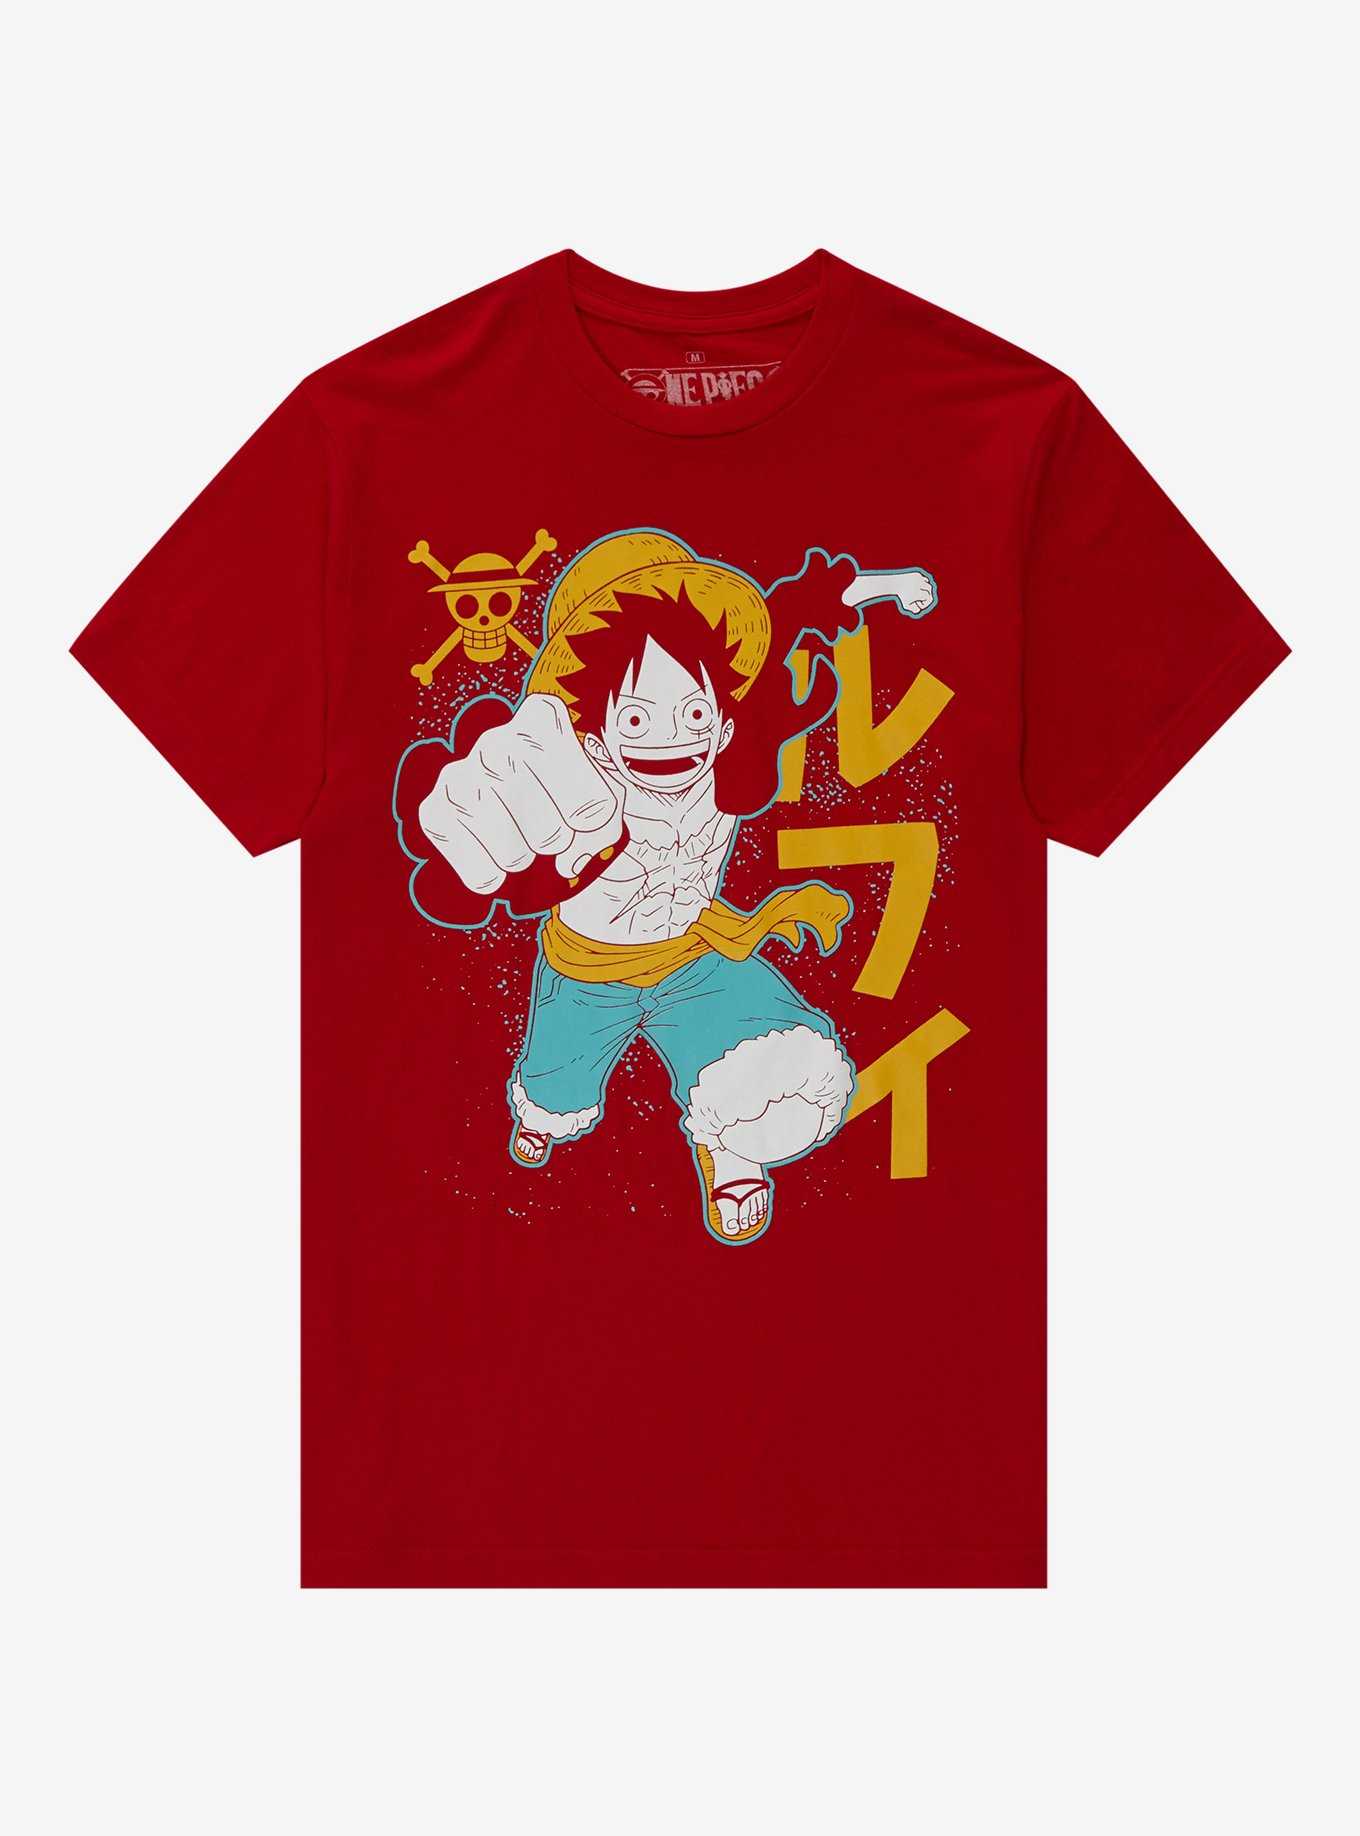 OFFICIAL One Piece Merch & Shirts | Hot Topic